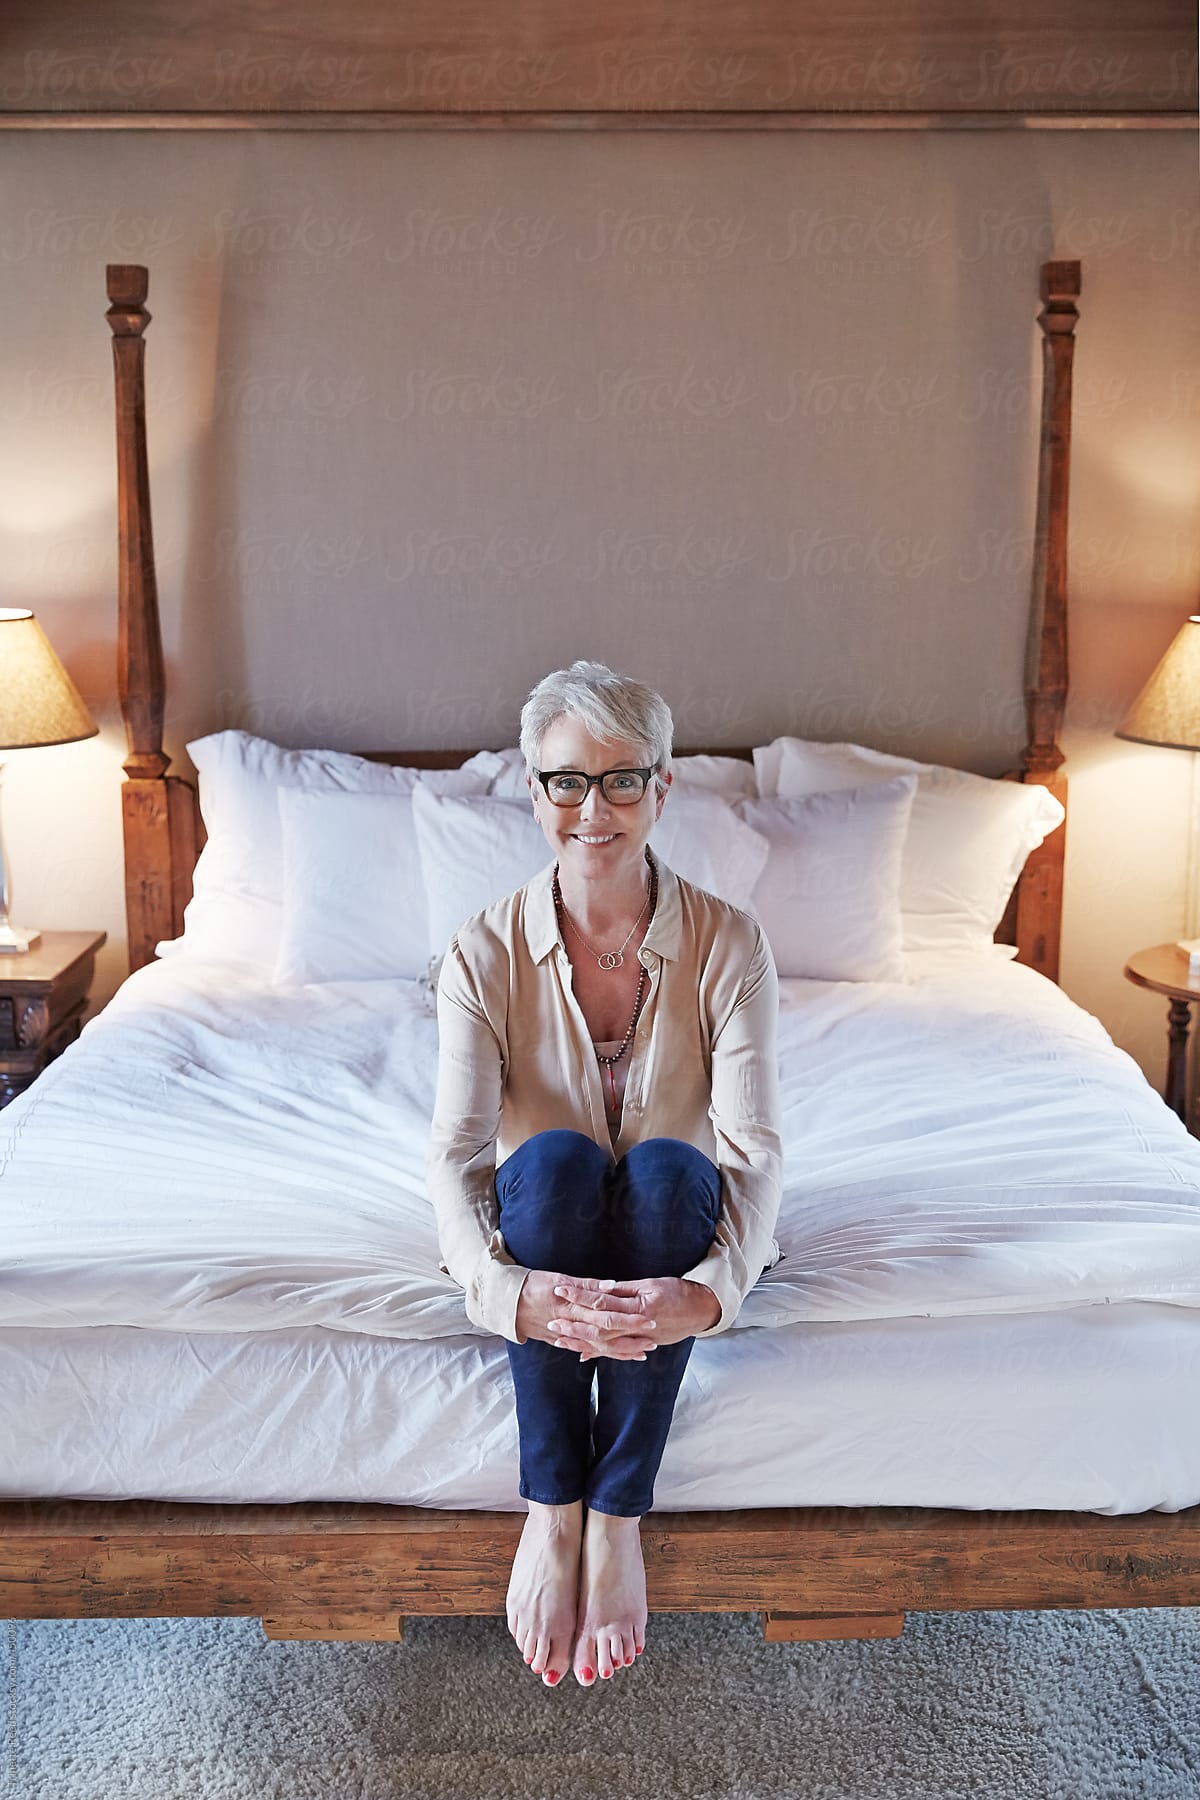 Portrait Of Mature Woman With Grey Hair Relaxing In Bedroom By Stocksy Contributor Trinette